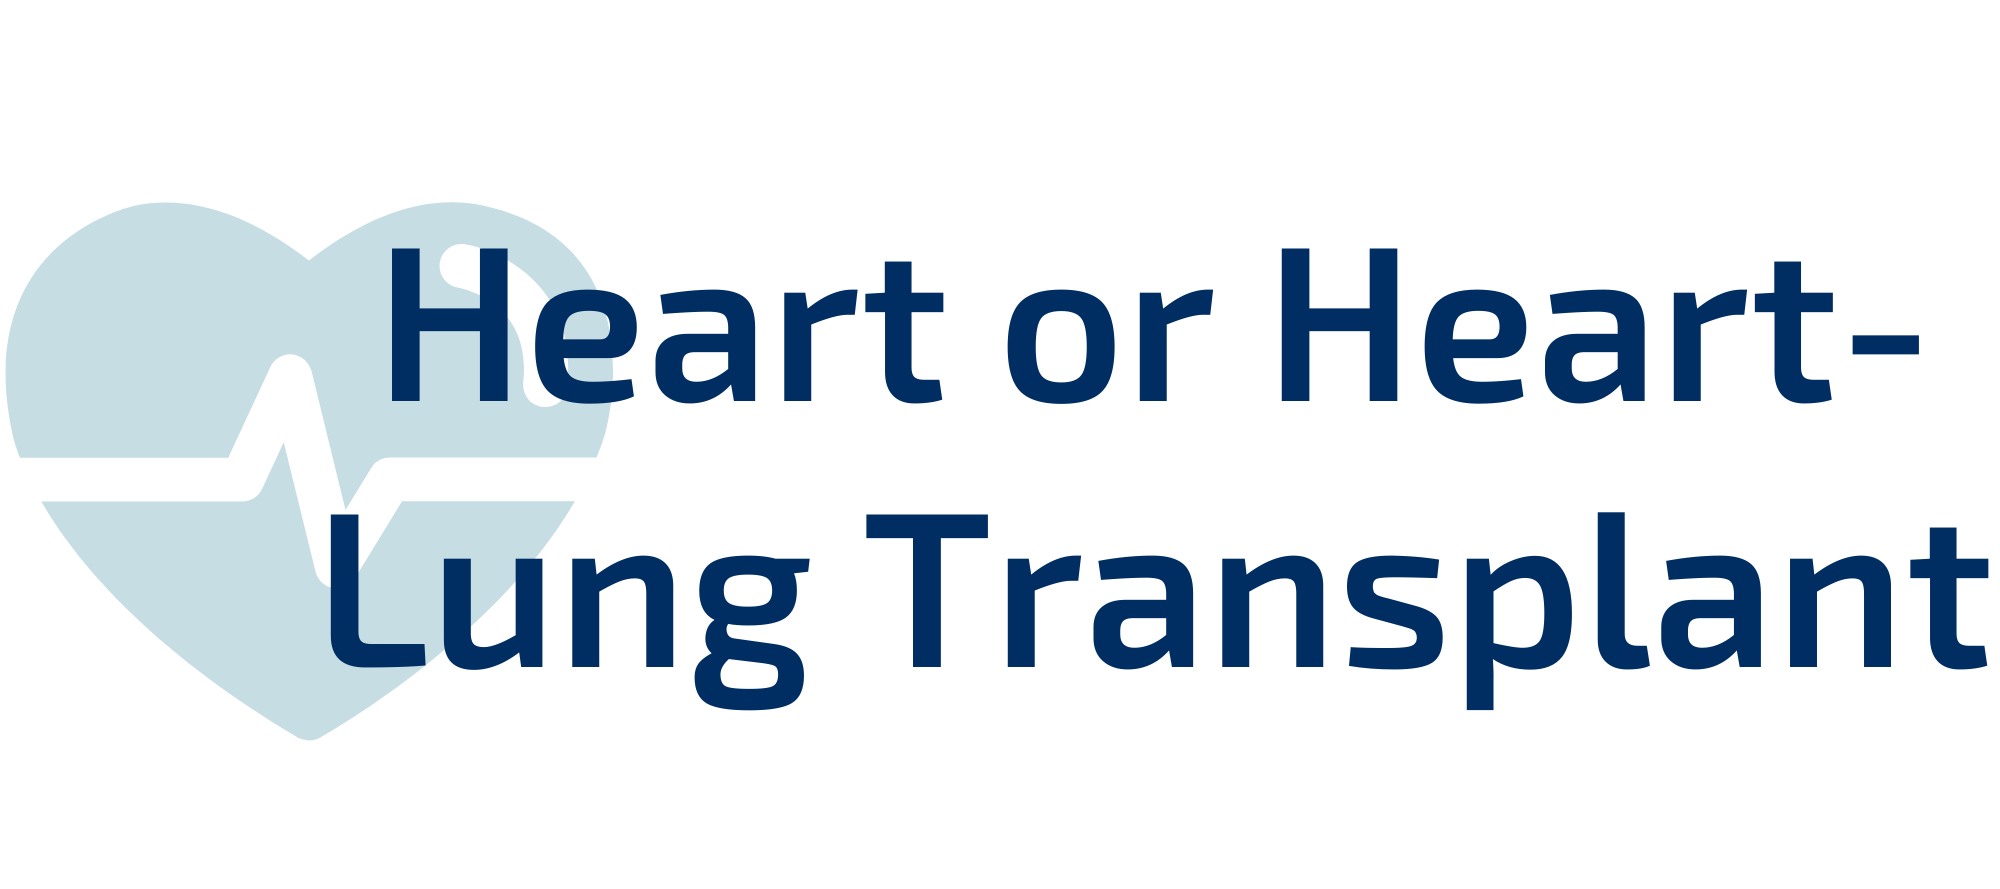 icon_heart or heart-lung transplant